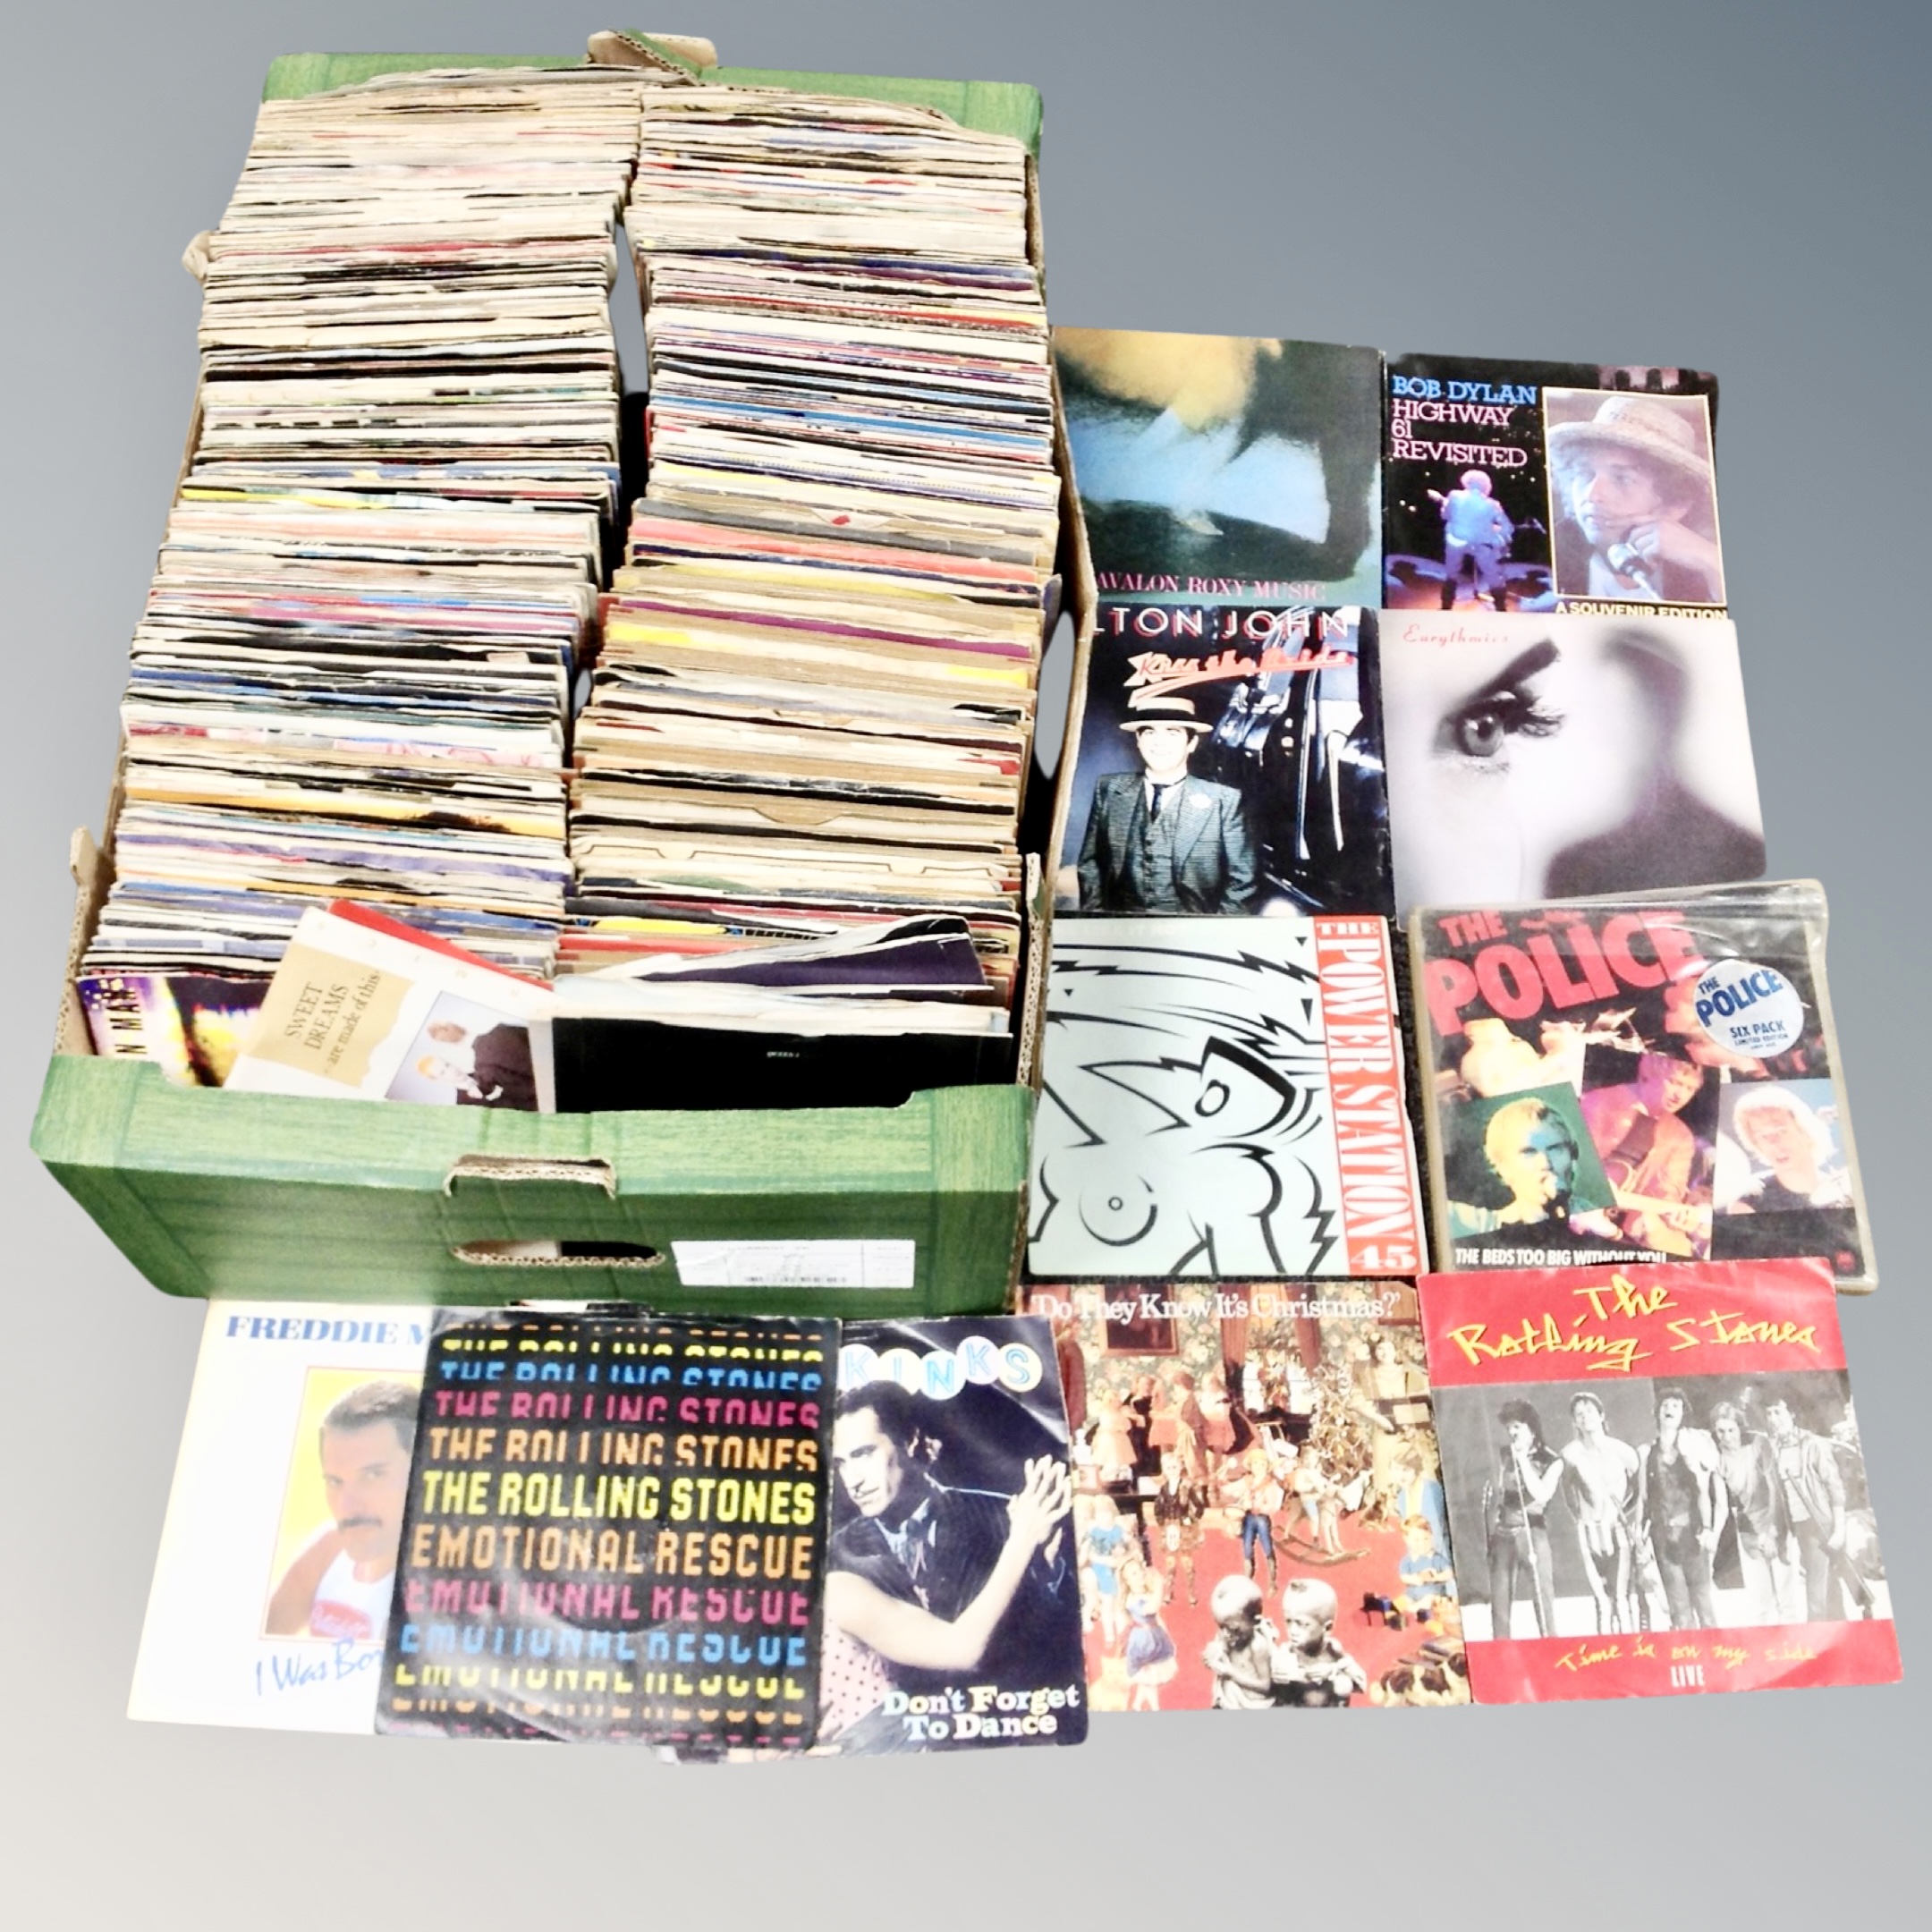 A box of large quantity of mid 20th century and later vinyl 7" singles to include Bob Dylan,